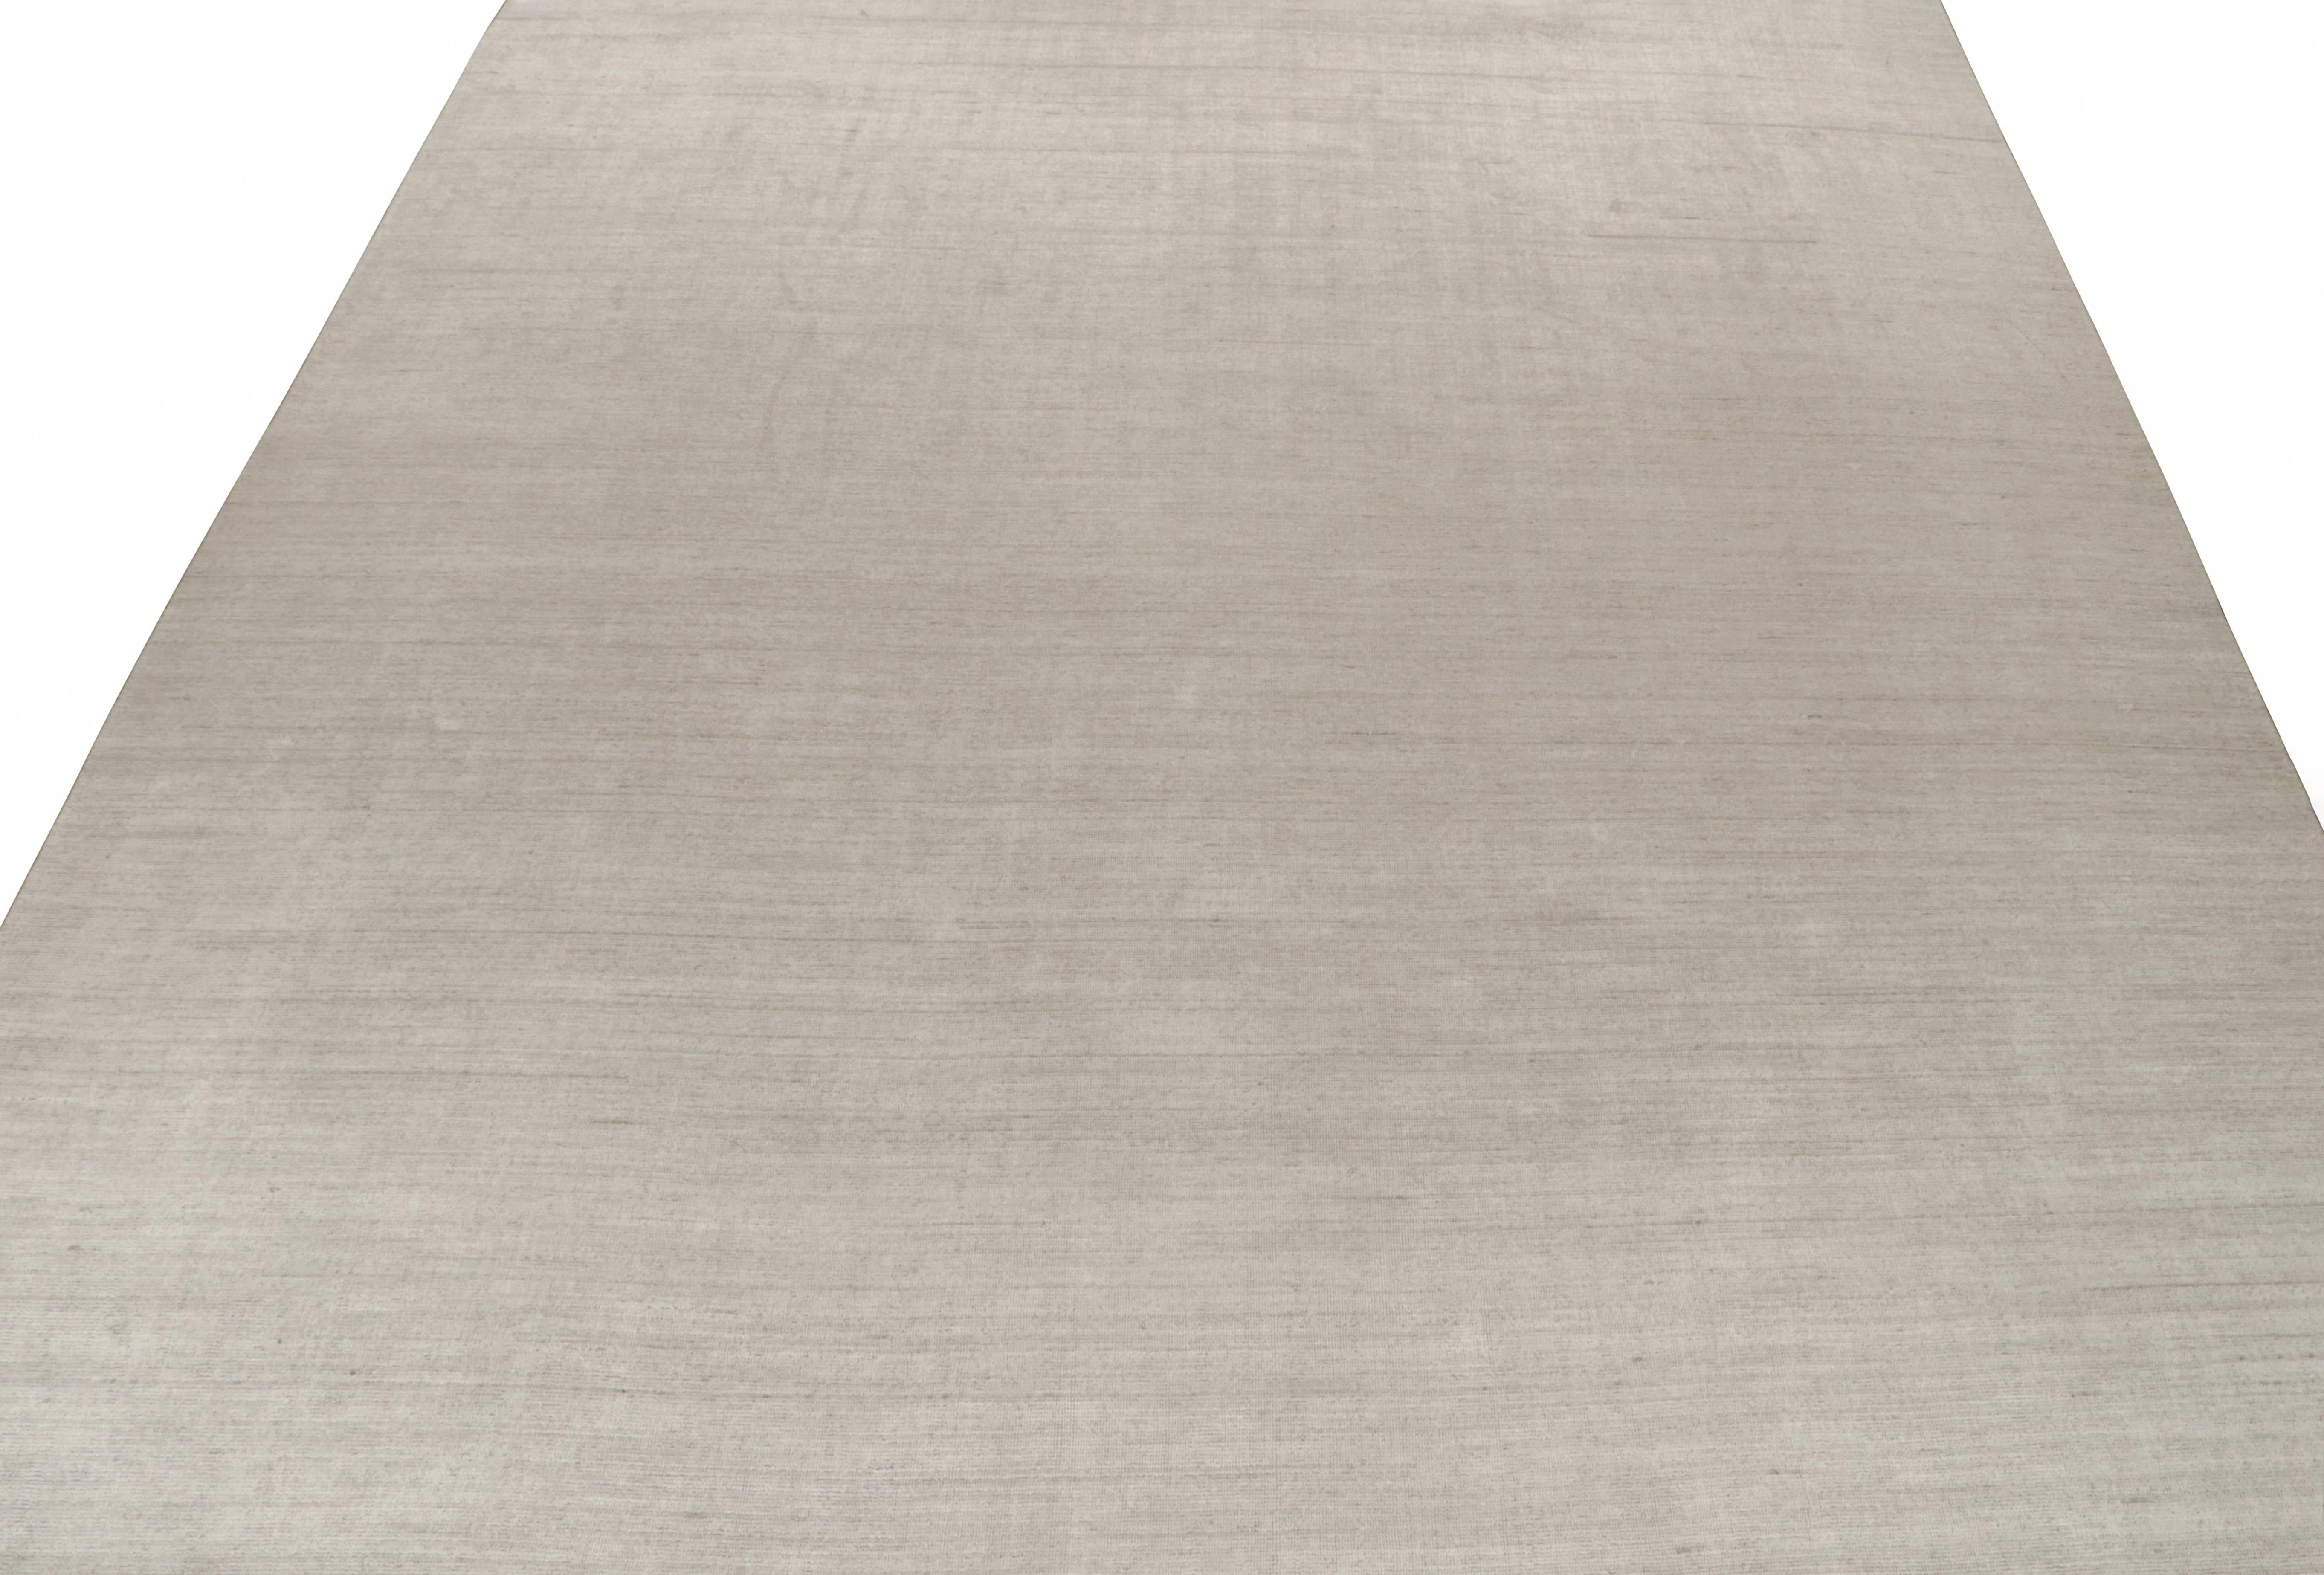 Indian Rug & Kilim’s Plain Modern Rug in Solid Silver-Gray Tone-on-Tone For Sale